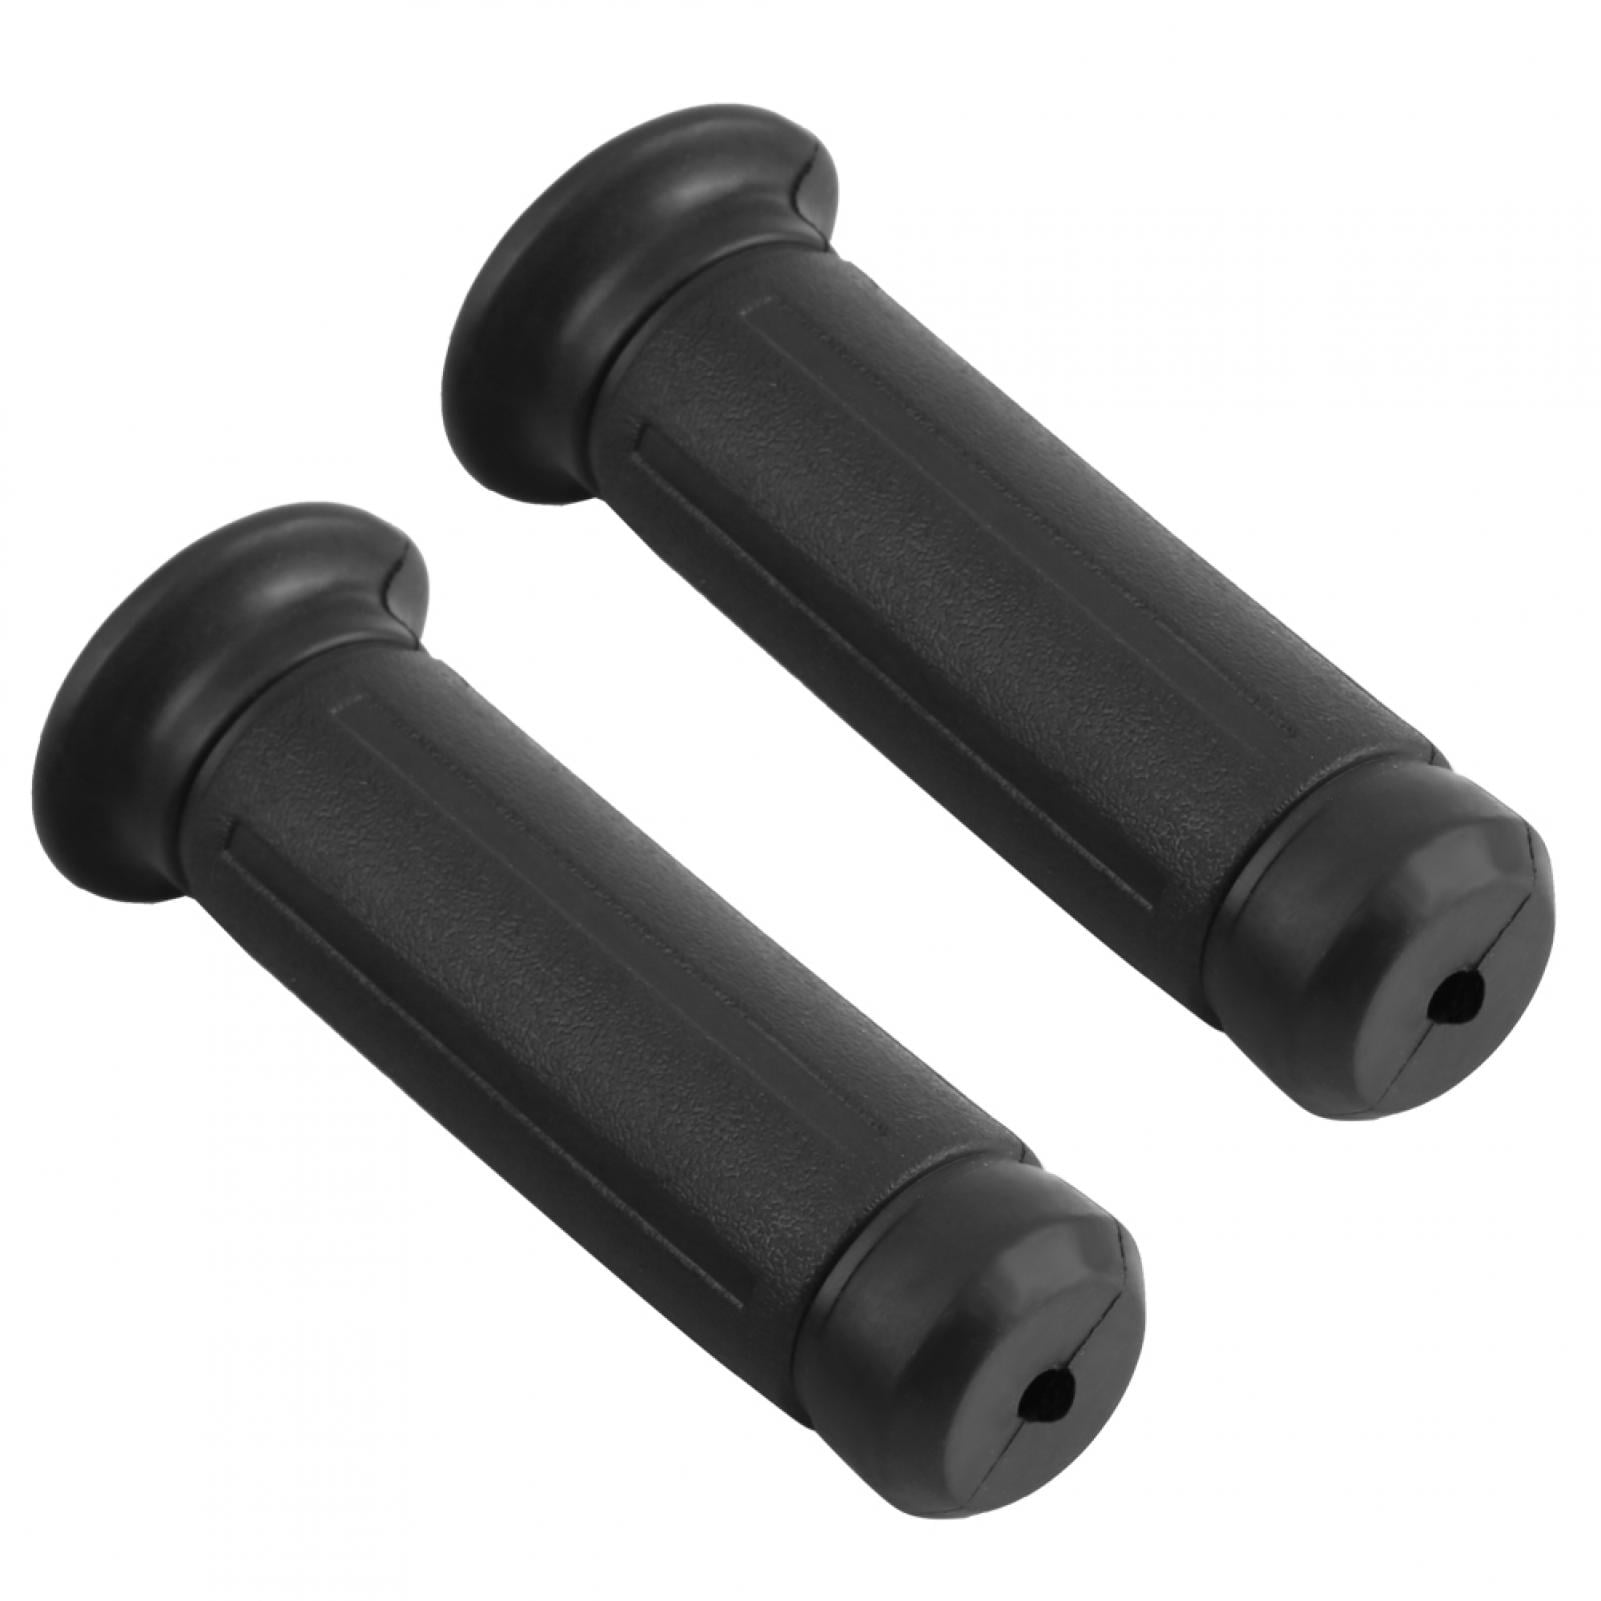 THROTTLE HANDLEBAR CONTROL GRIP SET 25MM GY6 4 STROKE CHINESE SCOOTER MOTORCYCLE 